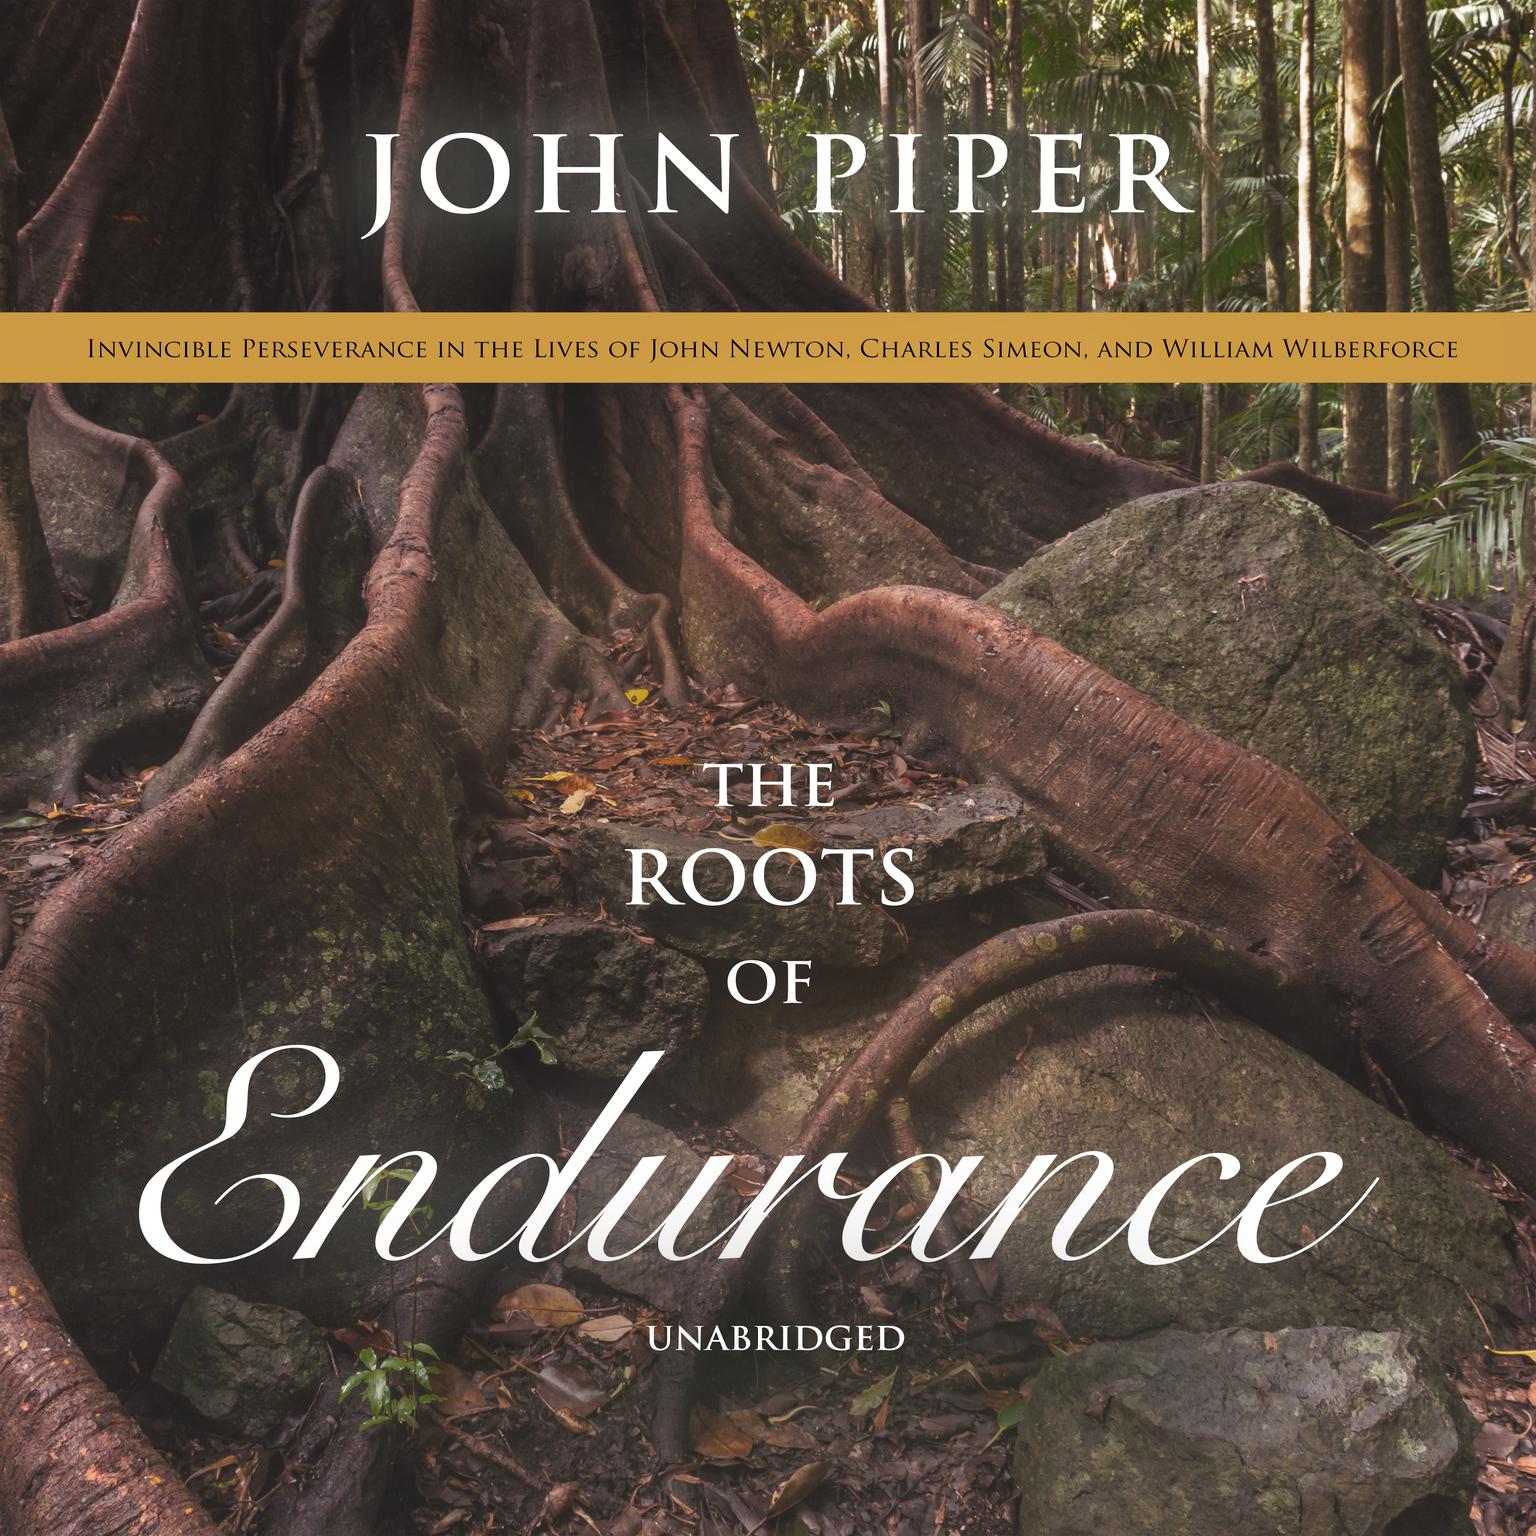 The Roots of Endurance: Invincible Perseverance in the Lives of John Newton, Charles Simeon, and William Wilberforce Audiobook, by John Piper